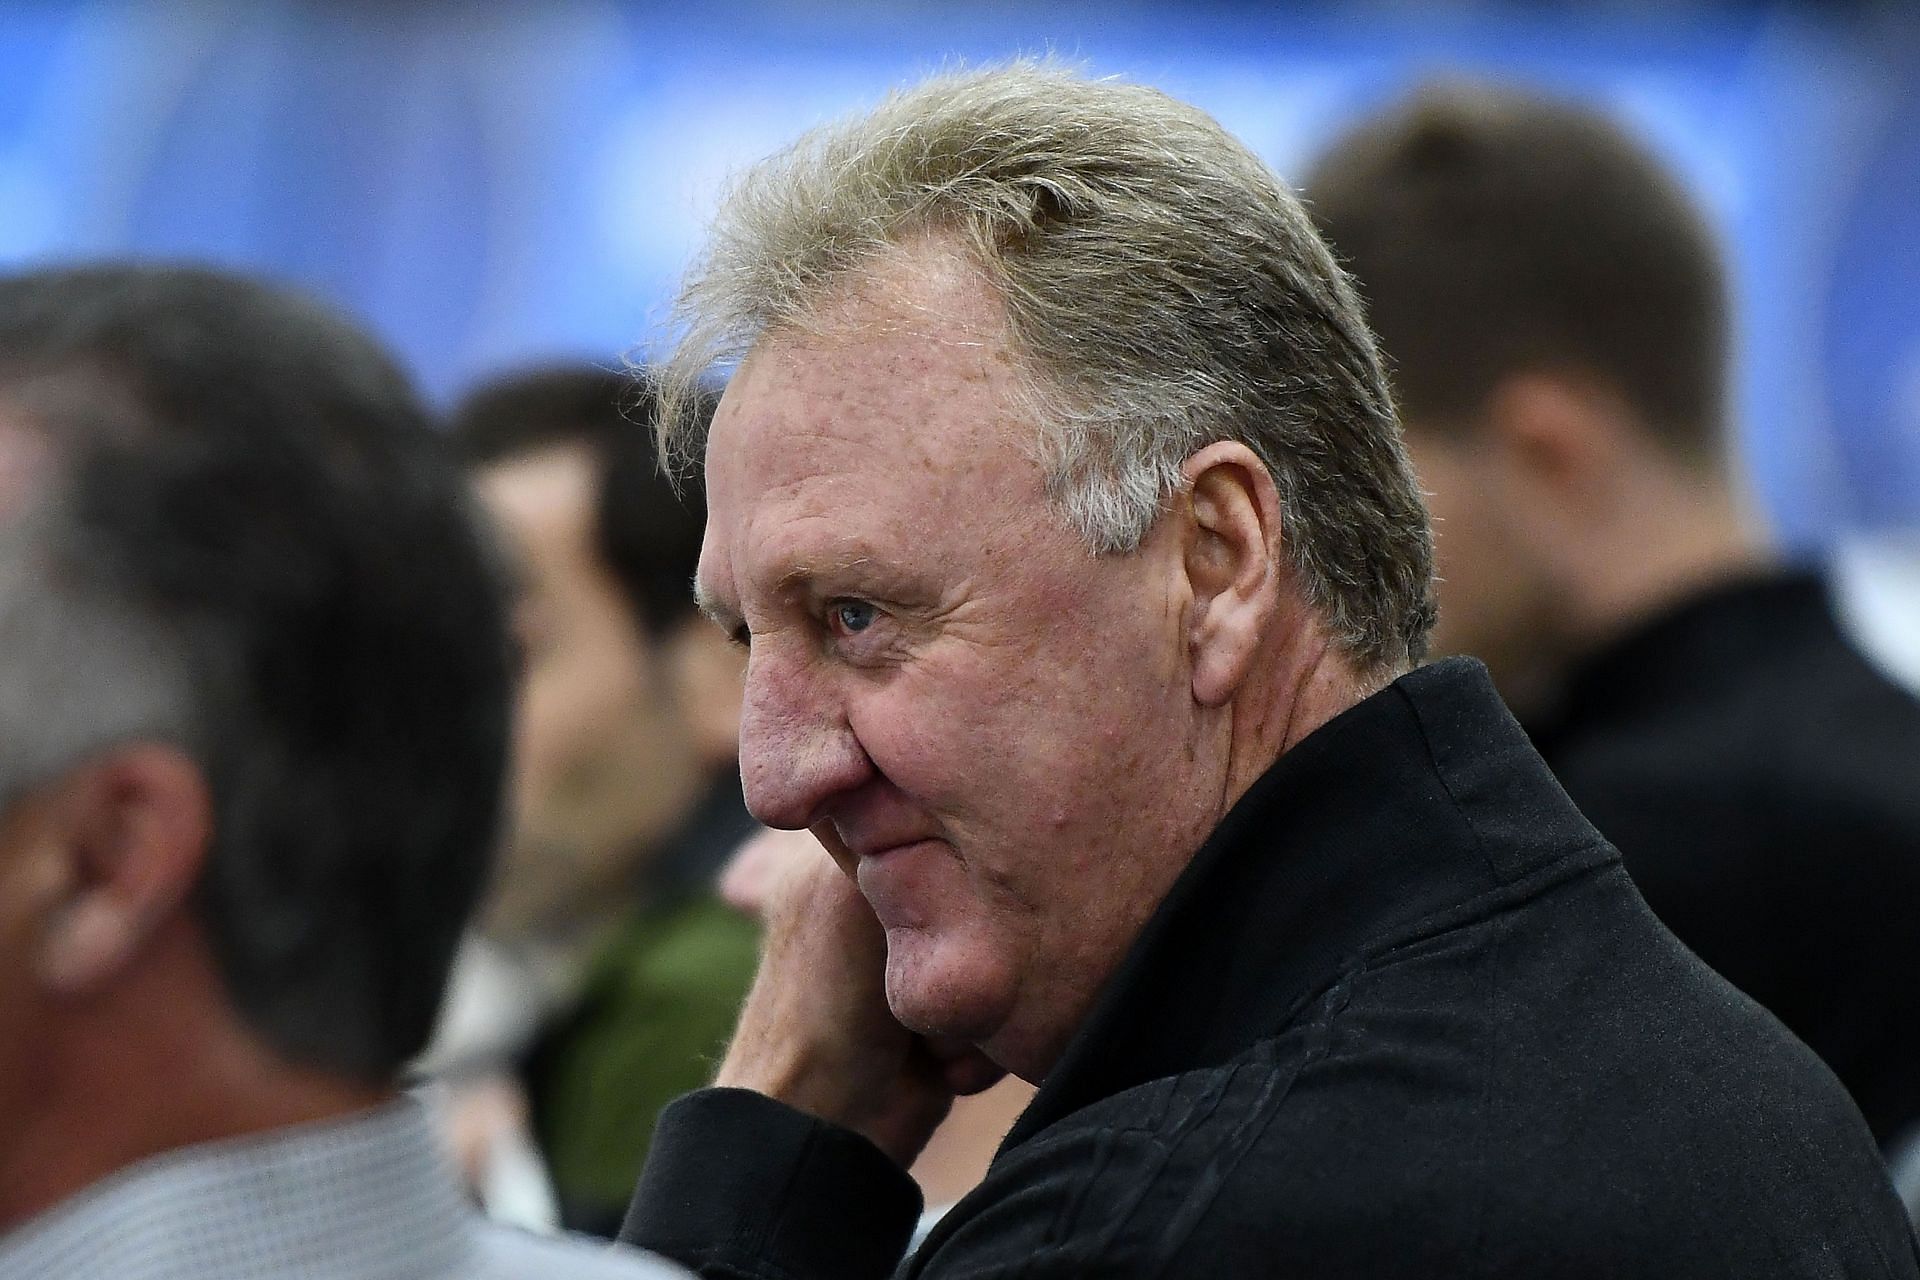 Former NBA player Larry Bird watches action during Day One of the NBA Draft Combine at Quest MultiSport Complex on May 16, 2019 in Chicago, Illinois.